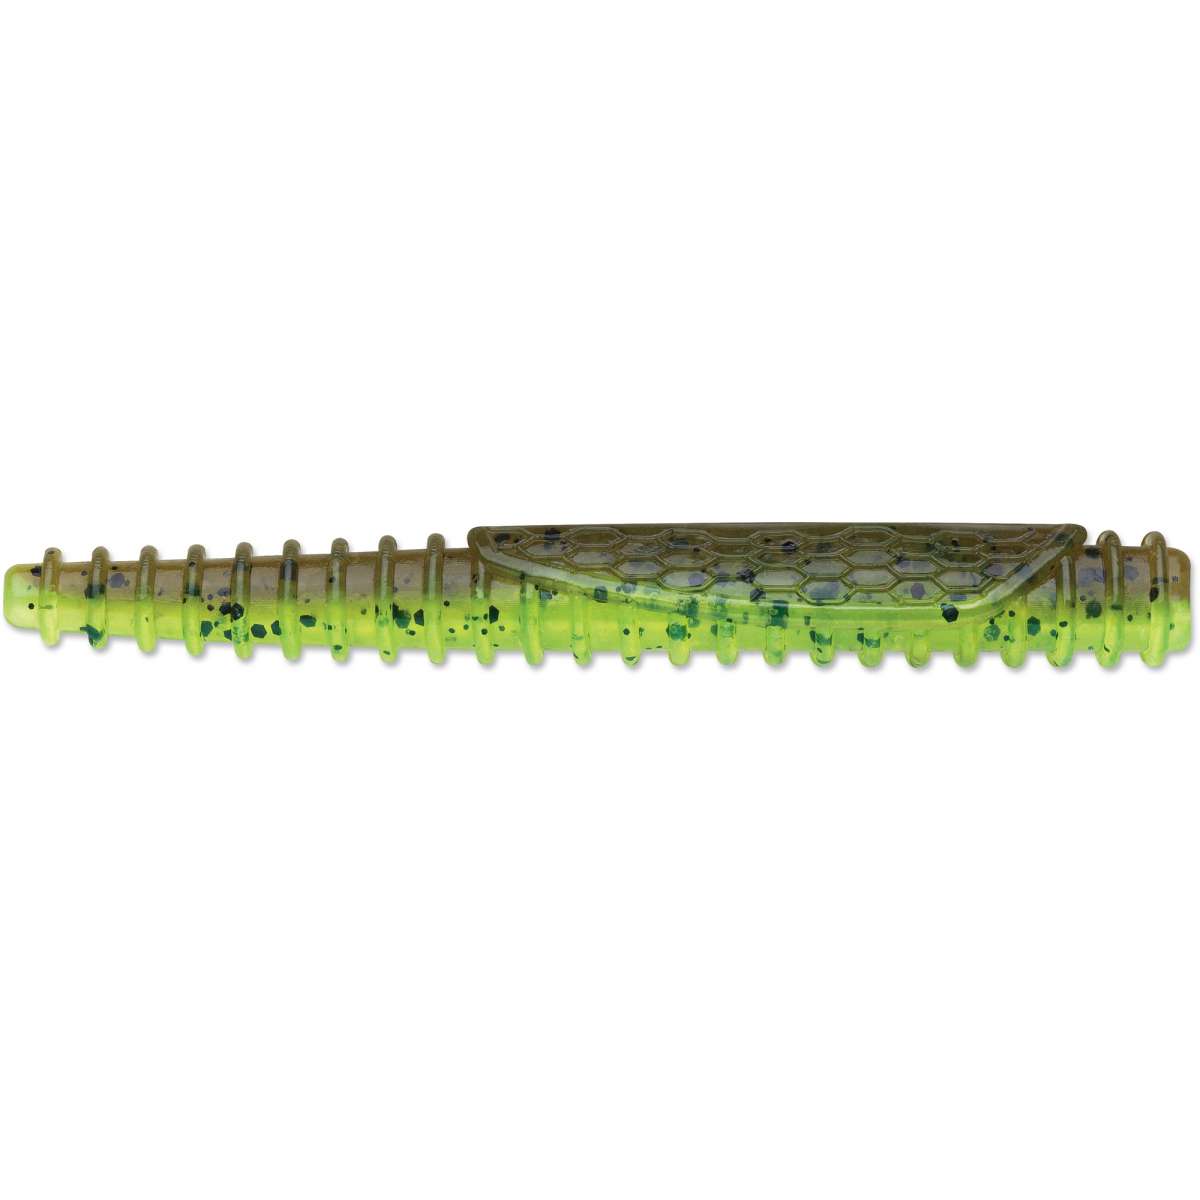 Rapala CrushCity Ned BLT, 3", Floating, Salt/Scent Infused, TPE Material, 10 Per Package